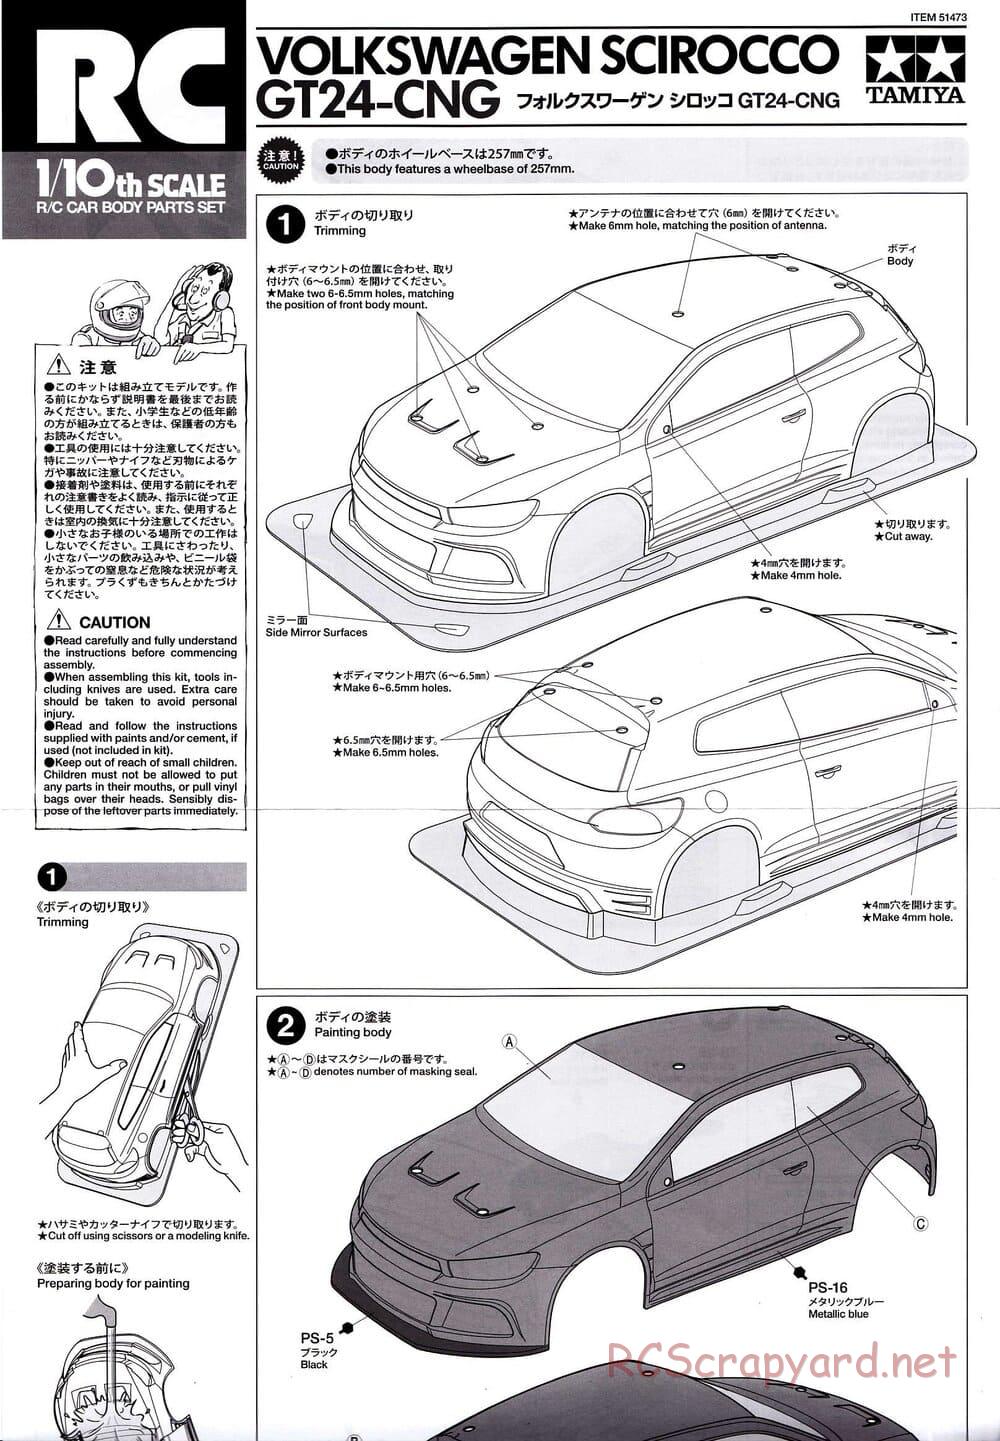 Tamiya - Volkswagen Scirocco GT24-CNG - FF-03 Chassis - Body Manual - Page 1